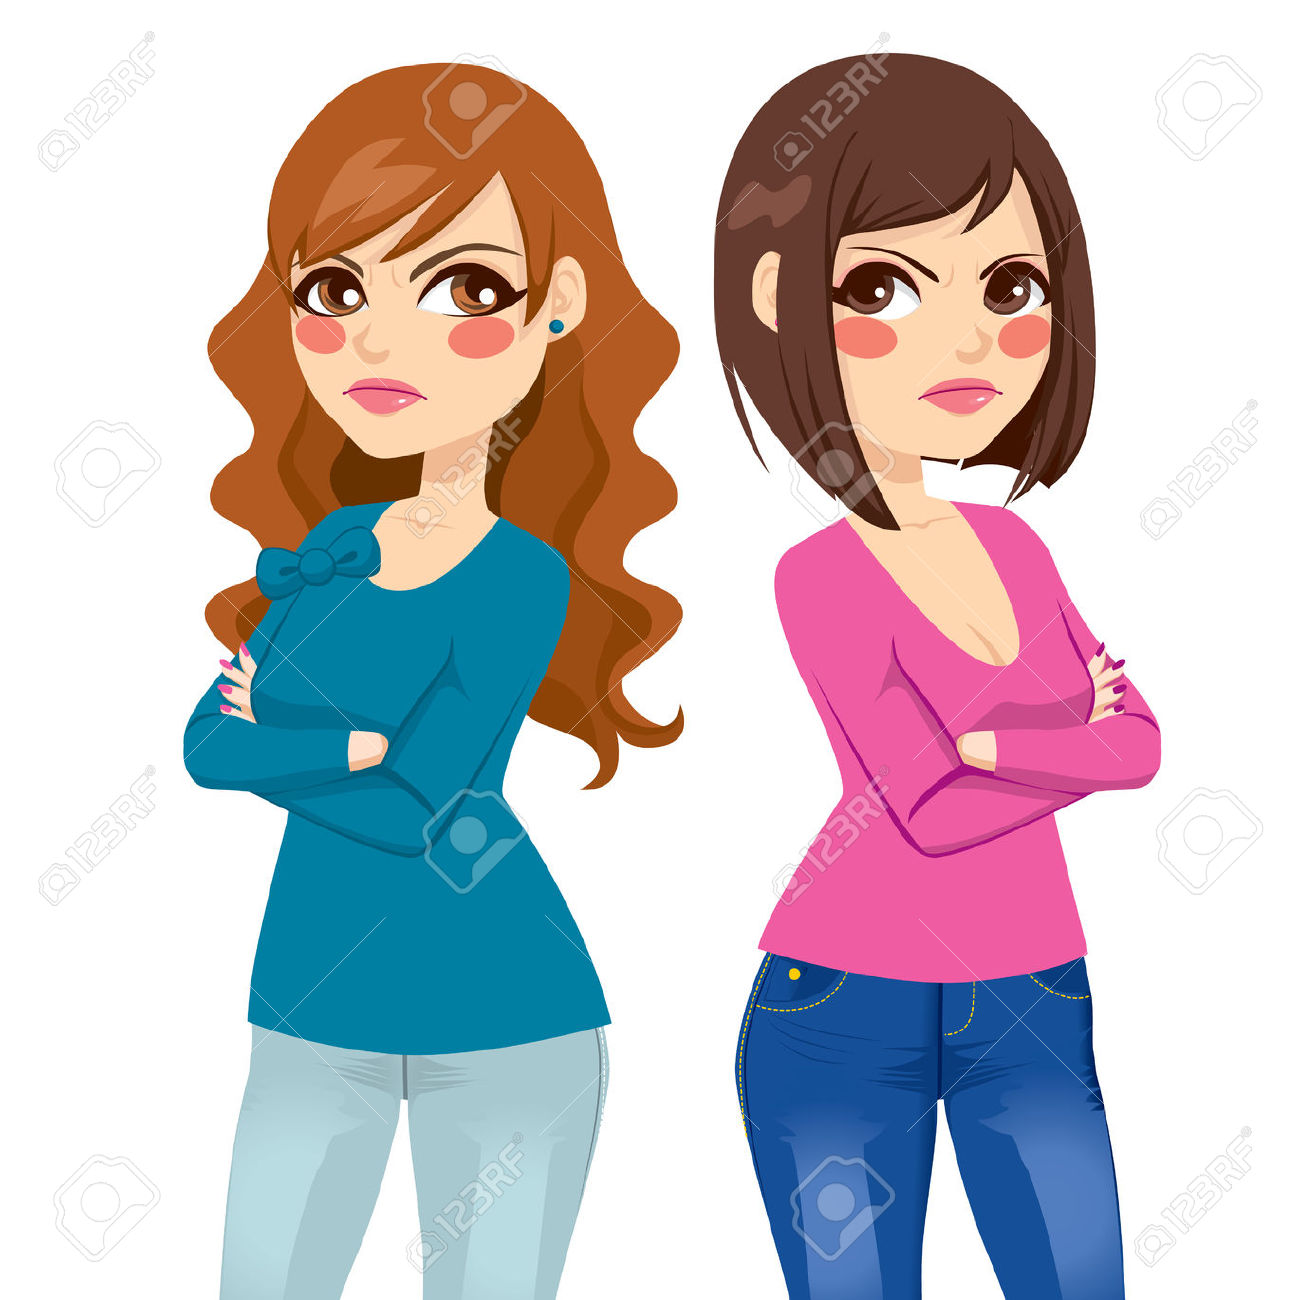 Two people with their backs against each other clipart.